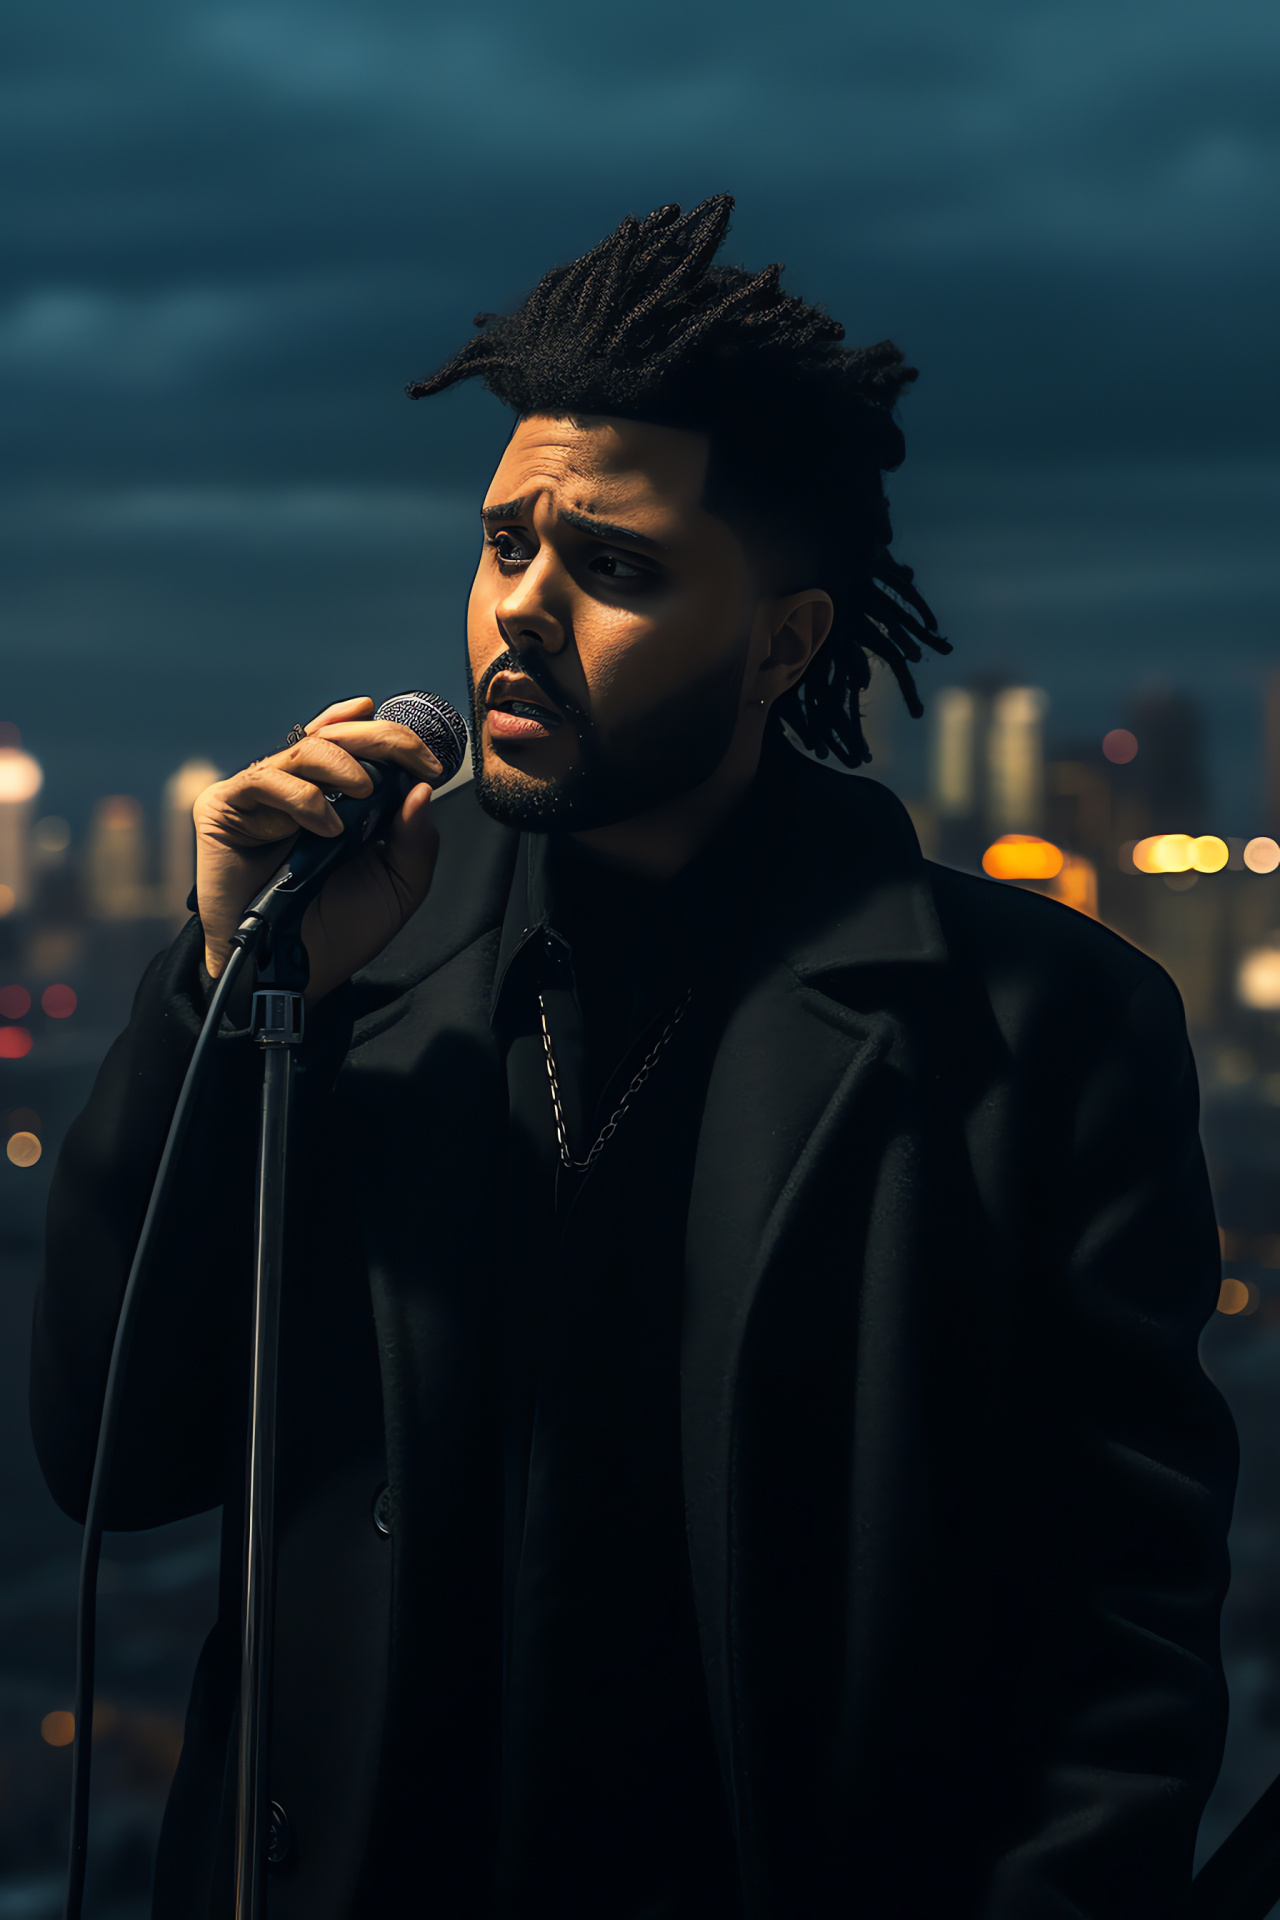 The Weeknd persona, Hairstyle mark, Distinguished setting, Modern architecture, Dark attire, HD Phone Wallpaper